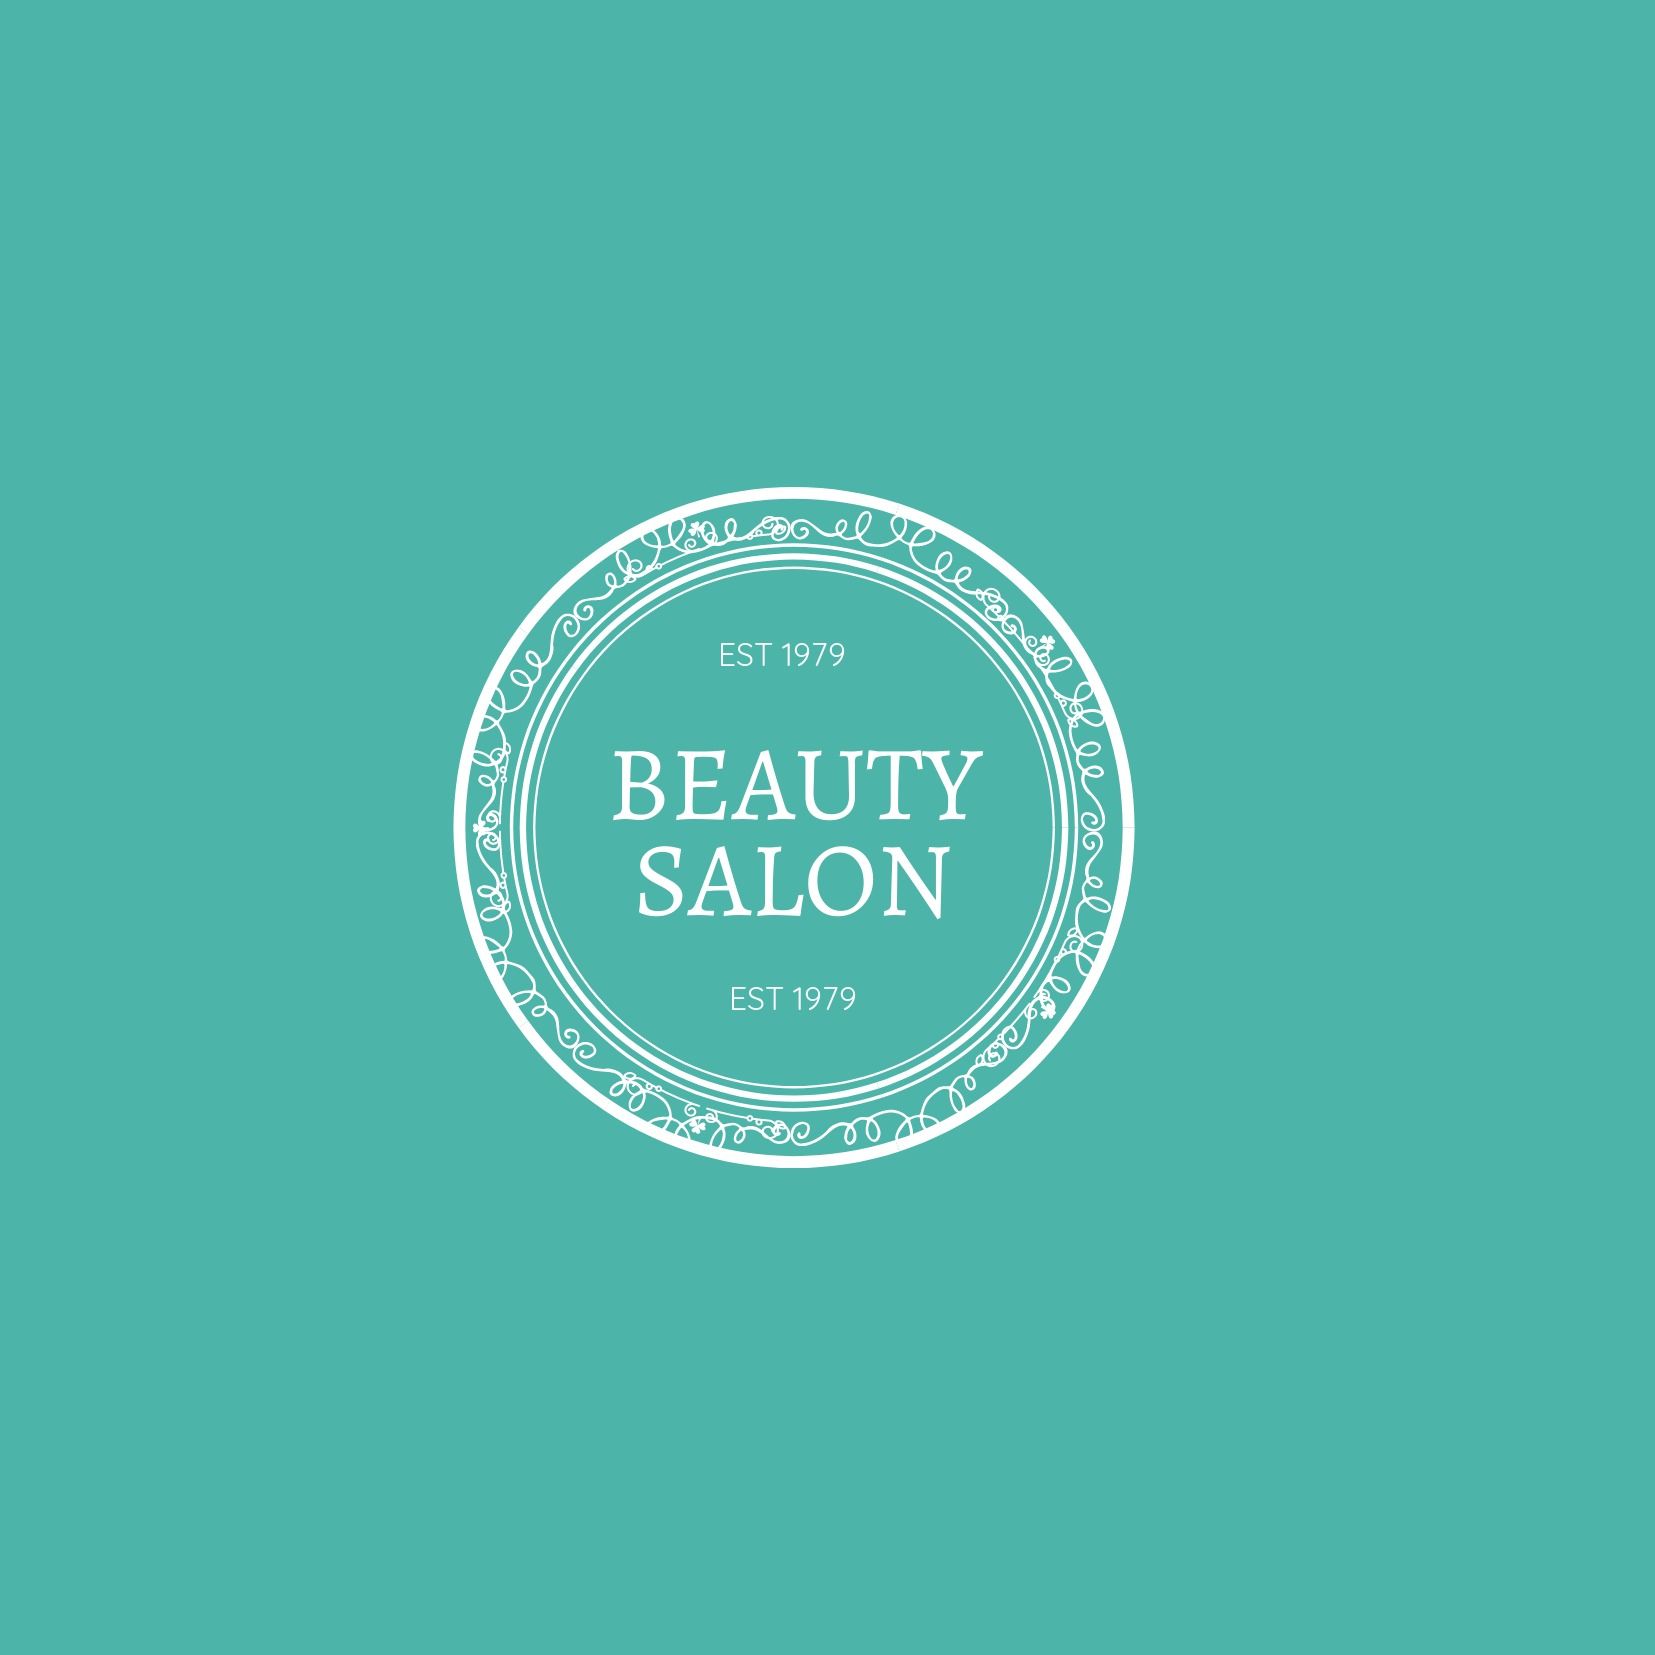 Beauty salon logo on a turquoise background with text in Alegreya SC font - Best way to Alegreya SC font - Image